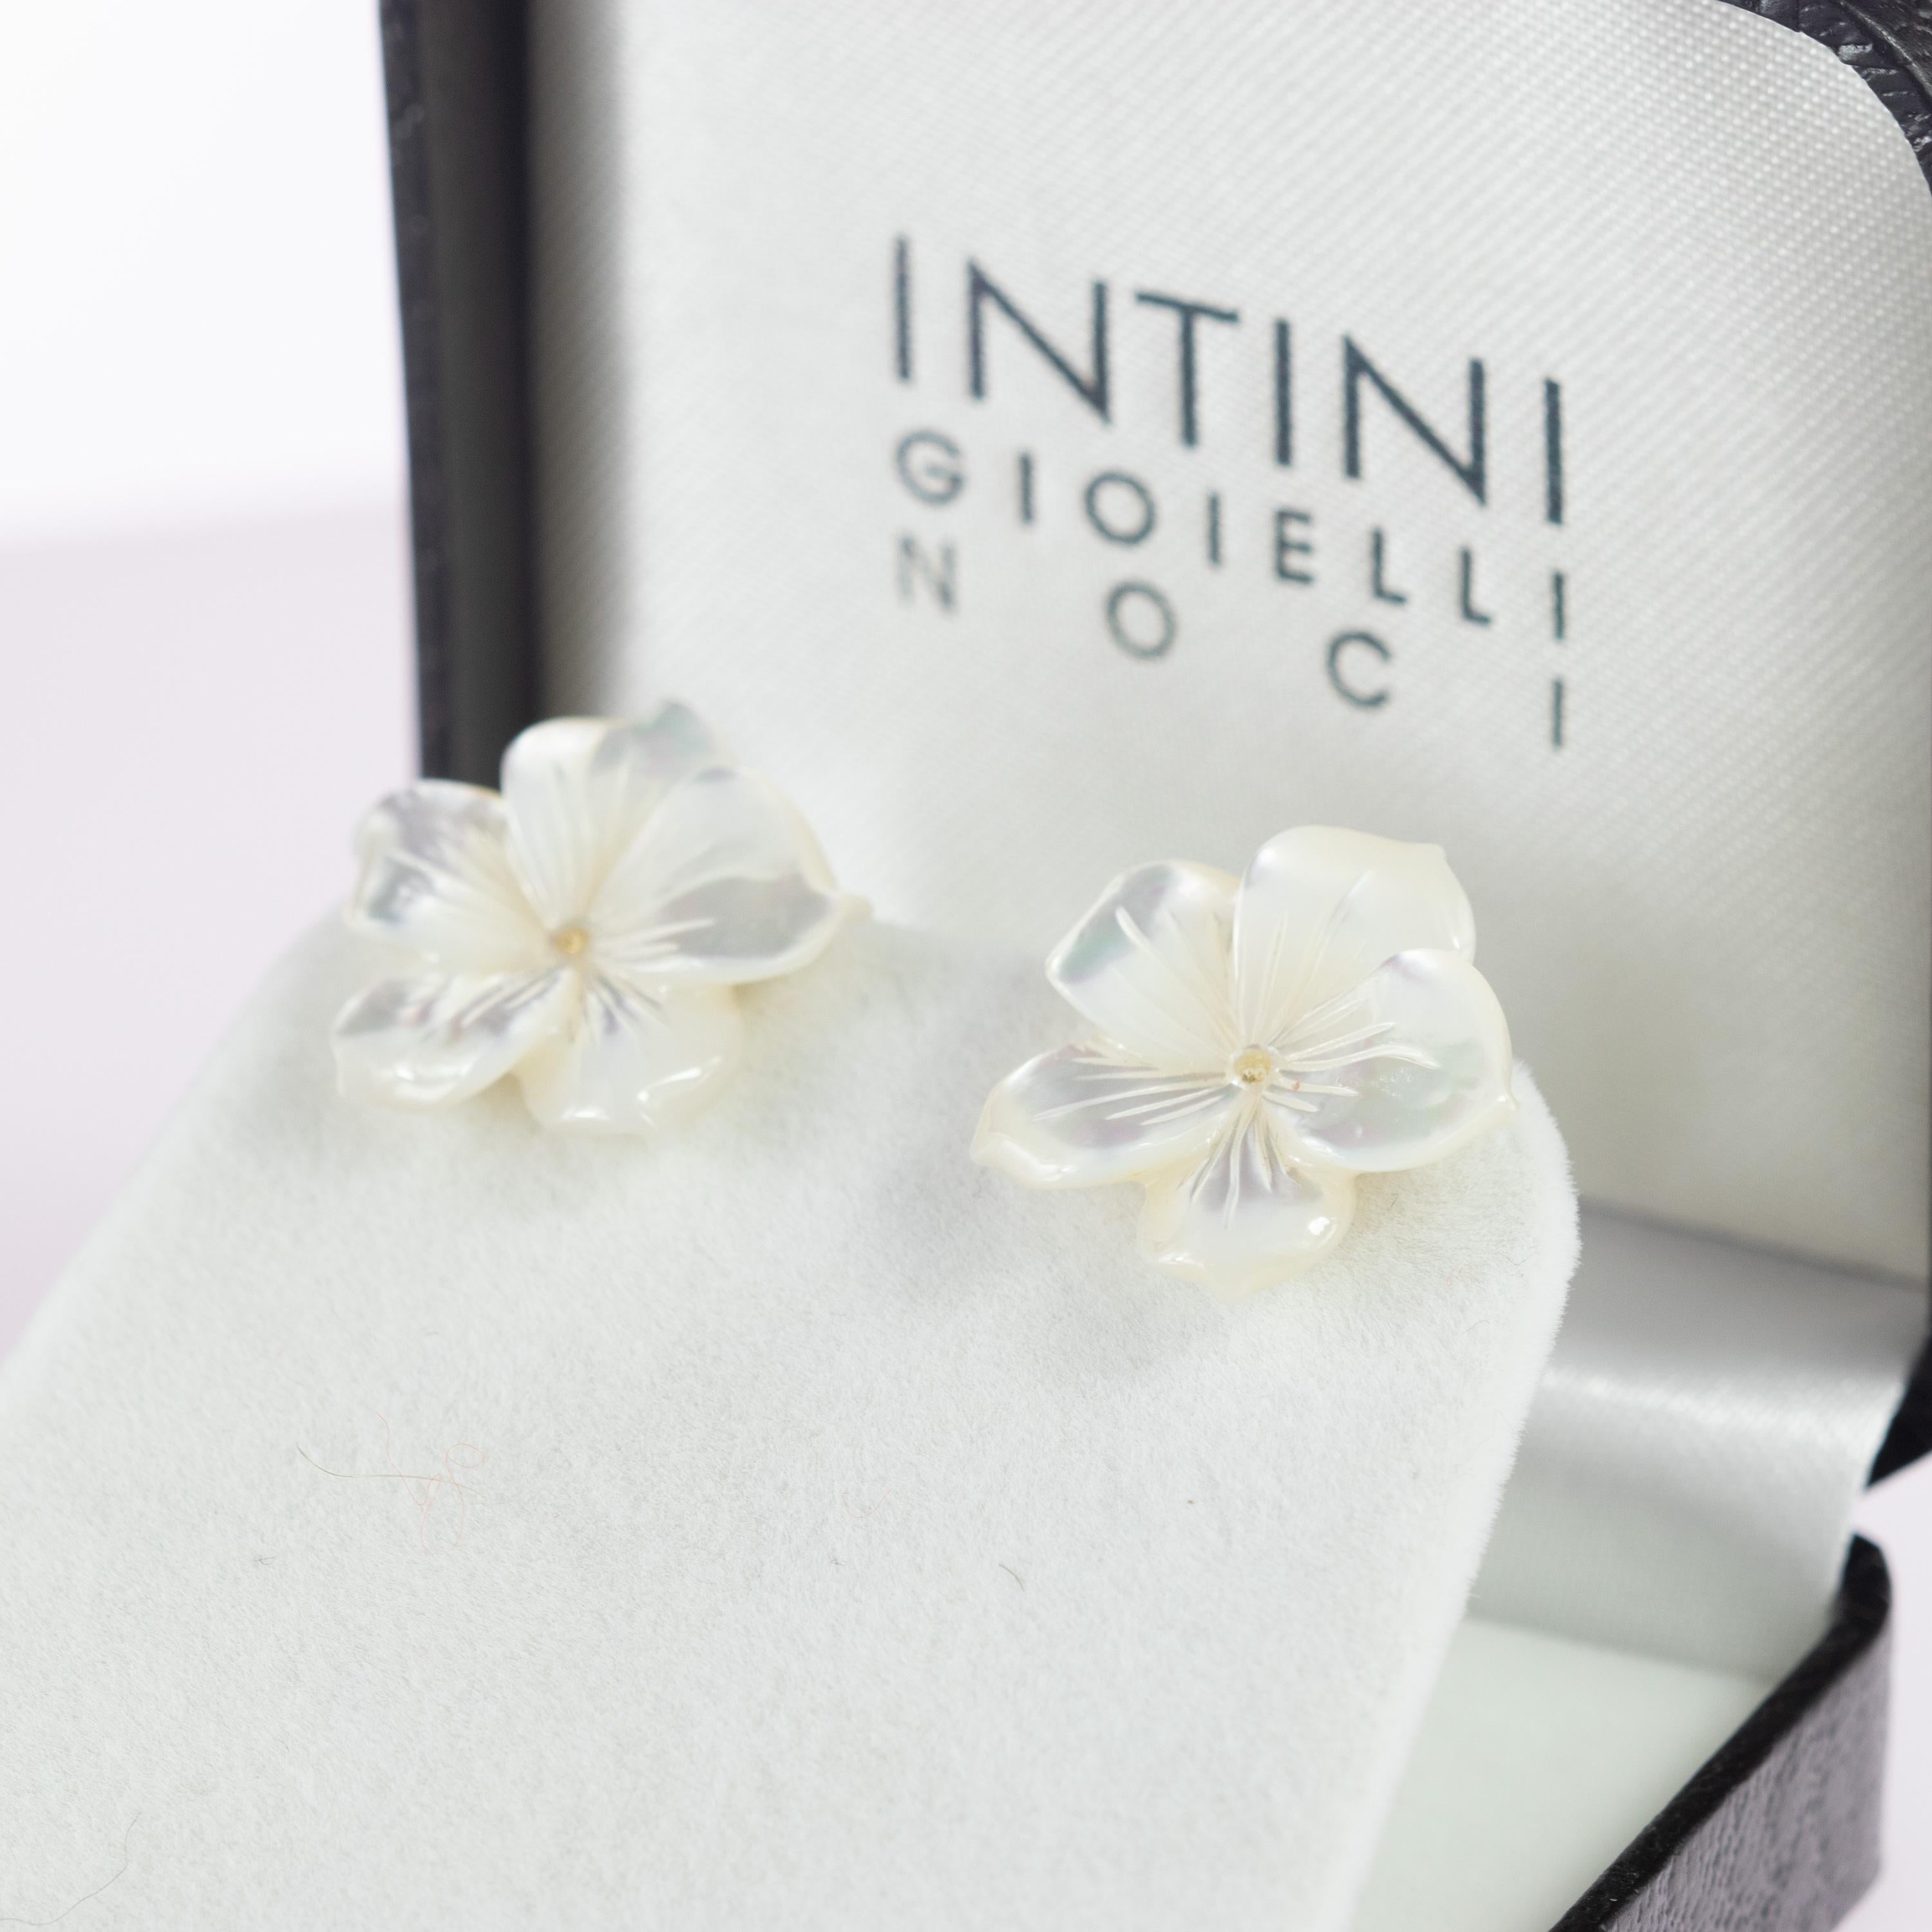 Astonishing and gorgeouis white mother pearl flower stud earrings. Natural carved petals that evoke the italian handmade traditional jewelry work.
 
This delicate design shows the sweetness and innocence of the jewelry. It takes us to those first